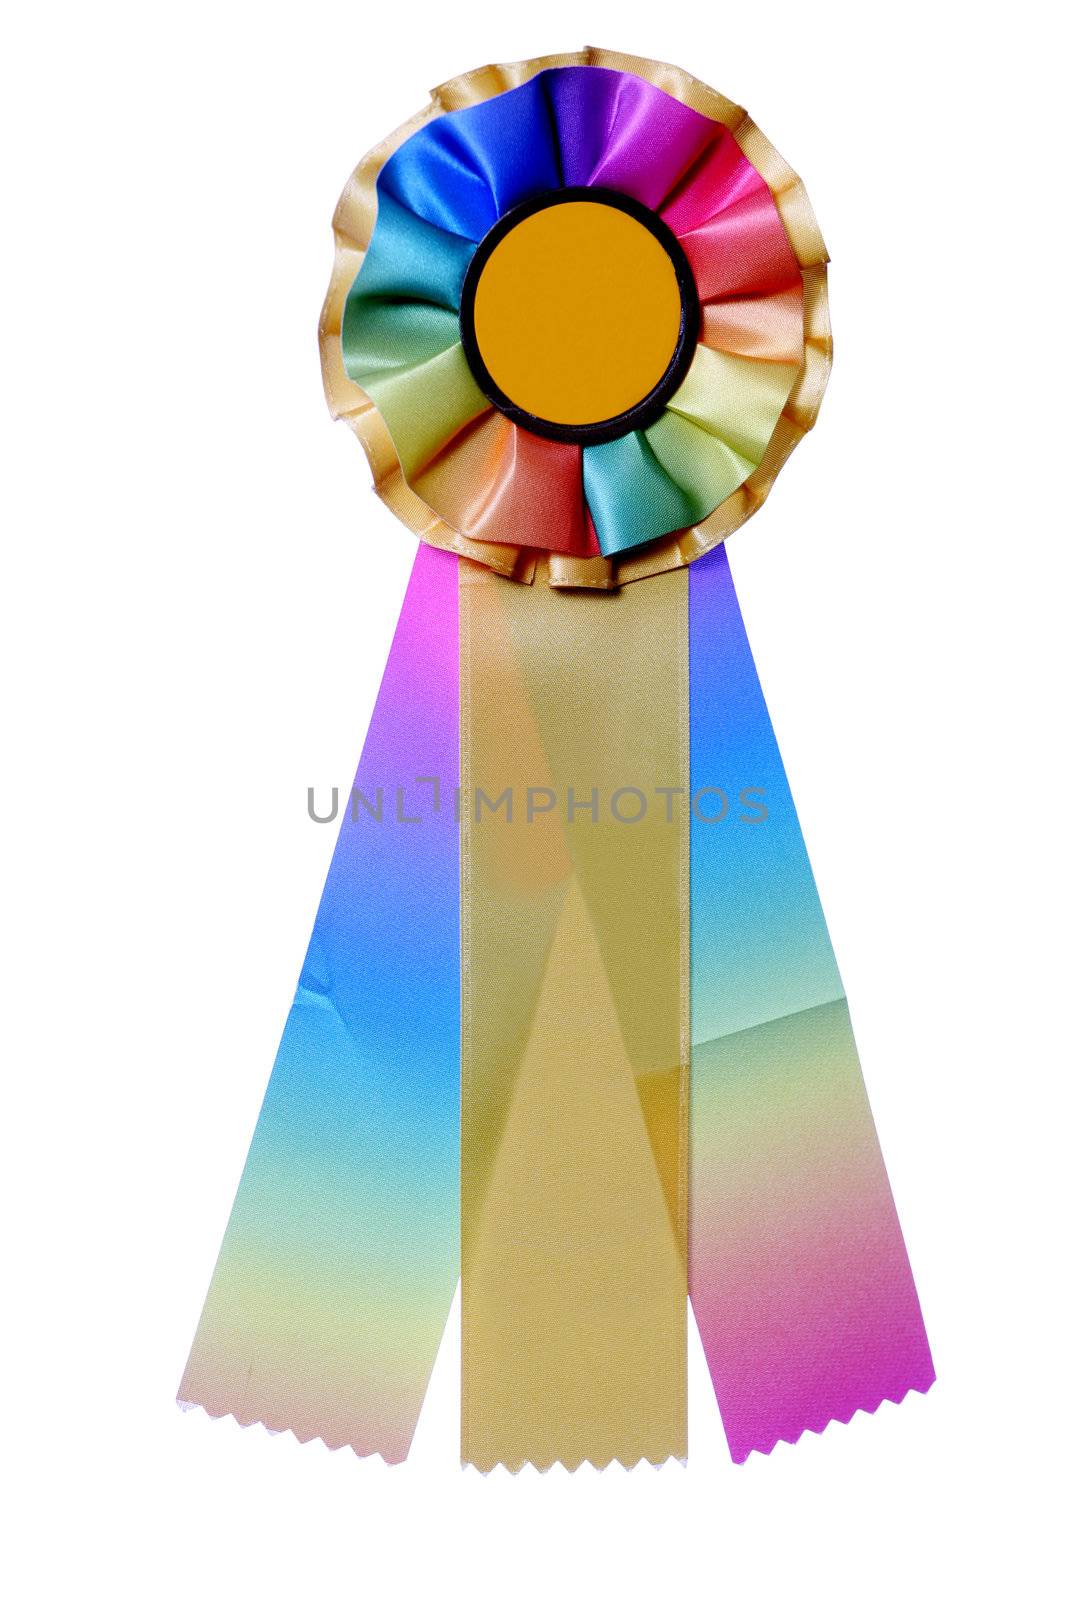 Multicolored ribbon for awards or prize